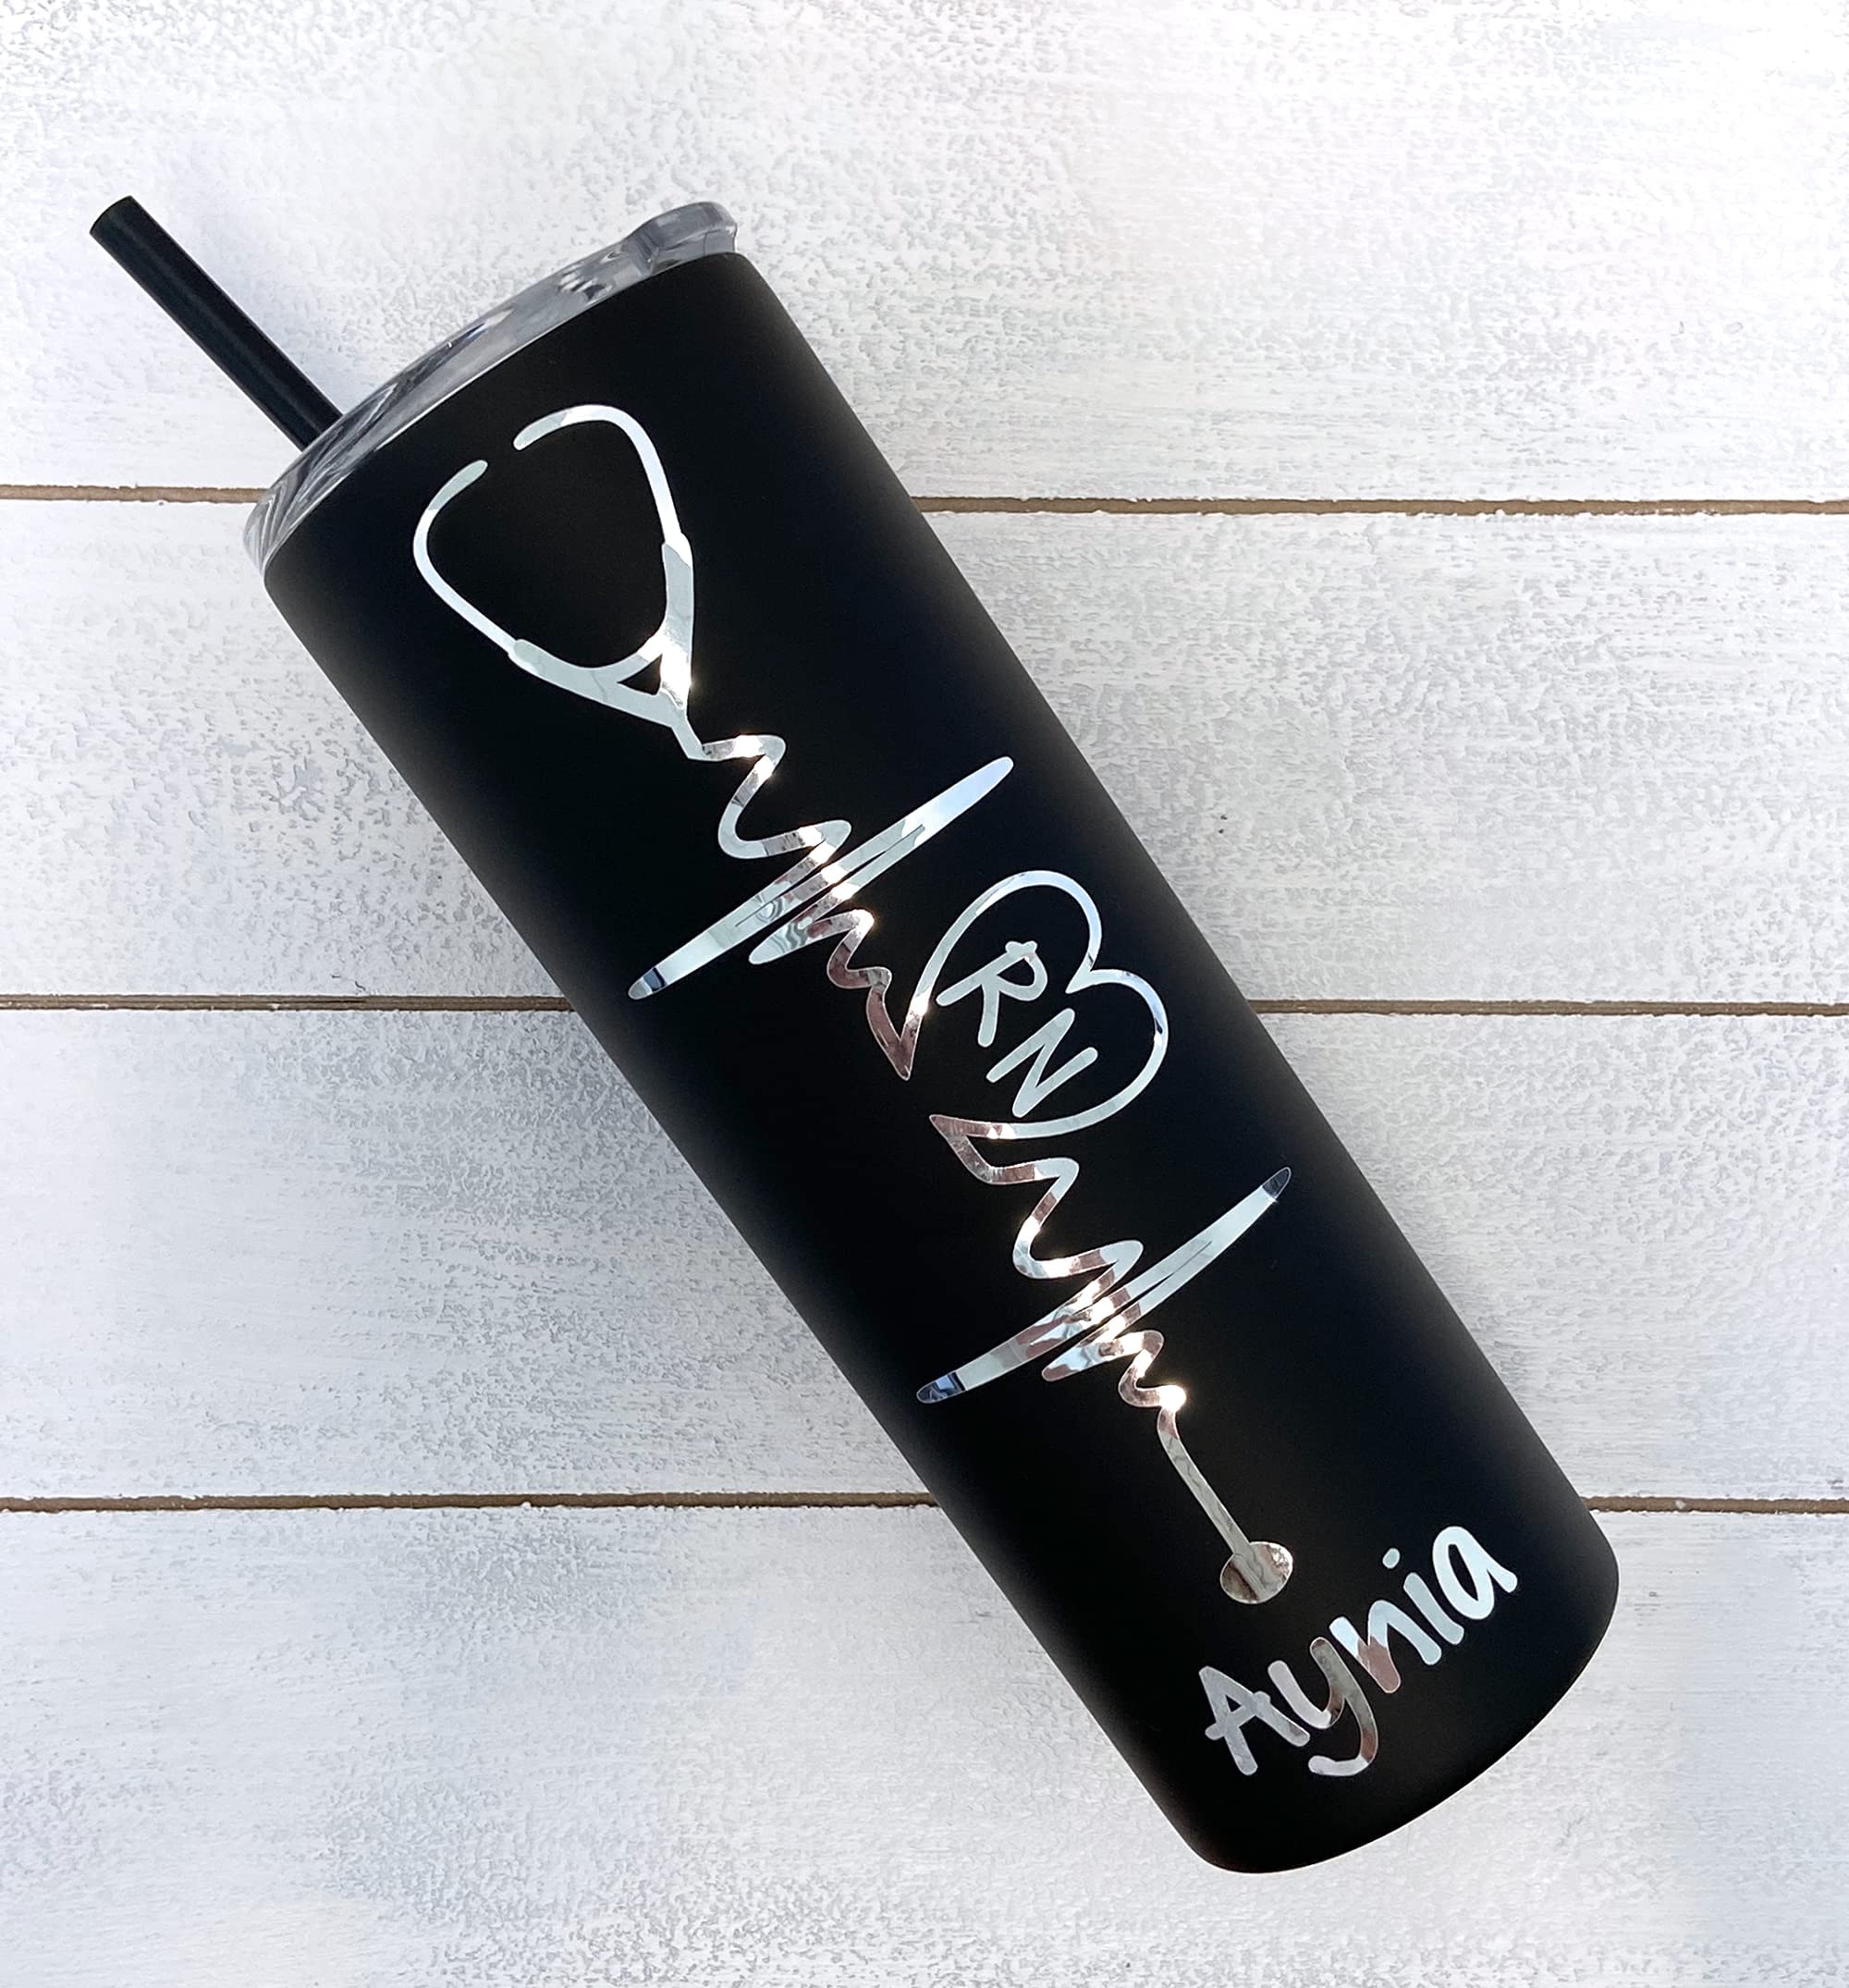 Heartbeat Nurse's Personalized 20 oz Stainless Steel Skinny Tumbler with Custom Stethoscope Vinyl Decal by Avito - Includes Straw and Lid - Nurse RN,CNA - Nurse Gift